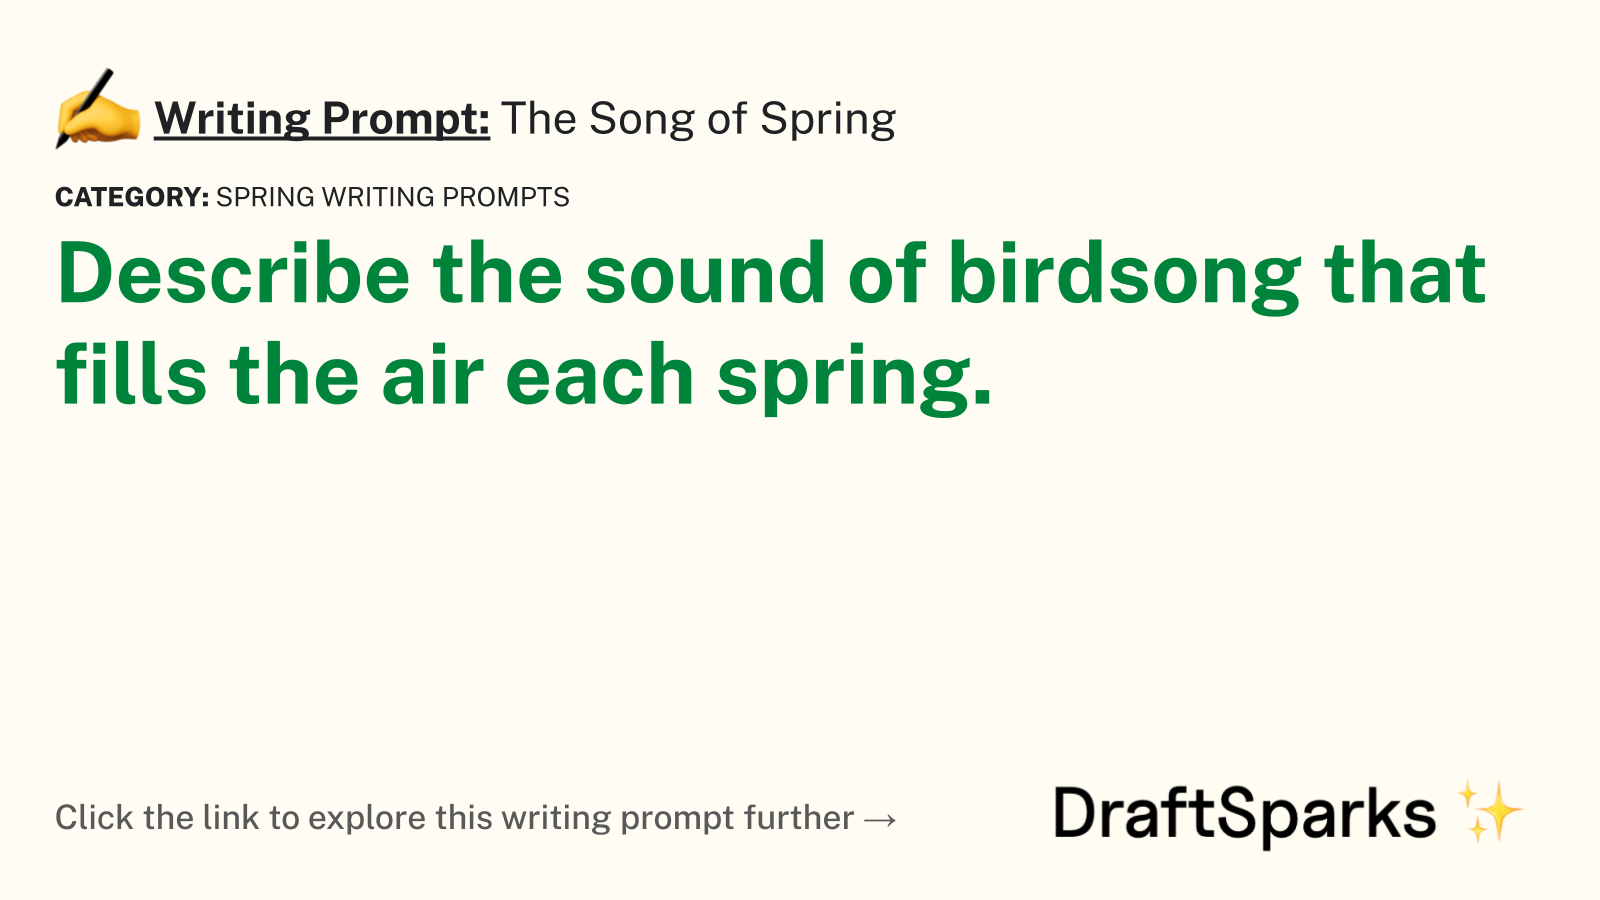 The Song of Spring